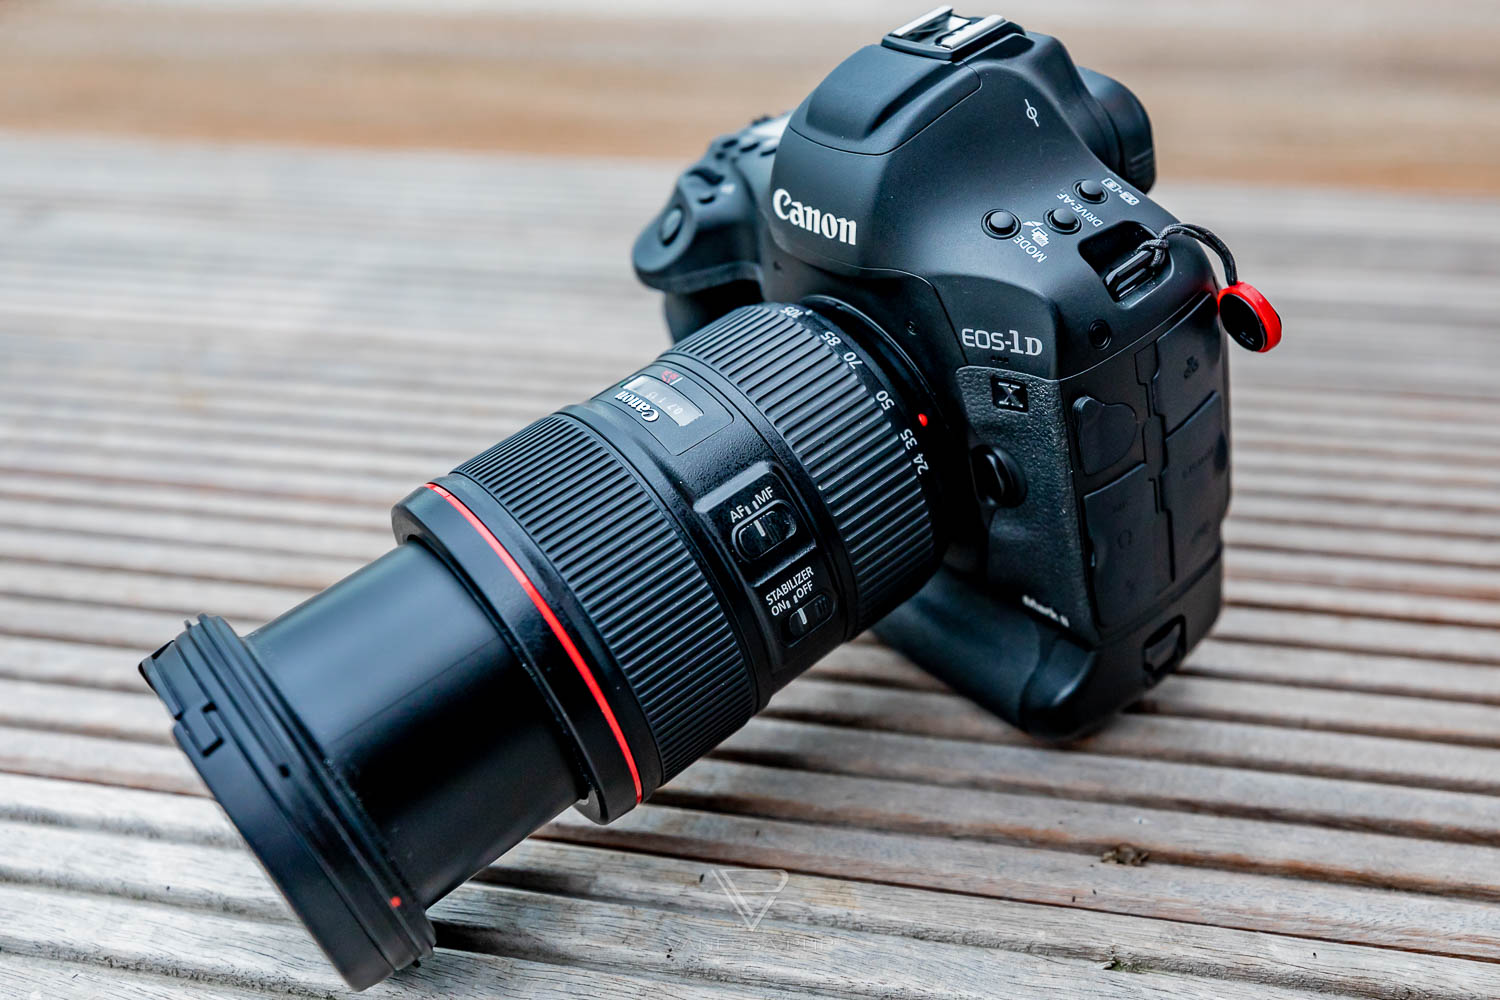 Canon EF 24-105mm f/4L IS II USM lens - review and experience - Canon EF 24-105mm f/4L IS II USM lens on Canon EOS 1Dx Mark II - Photoblog - Review - Rating - Field Report - How good is the lens?